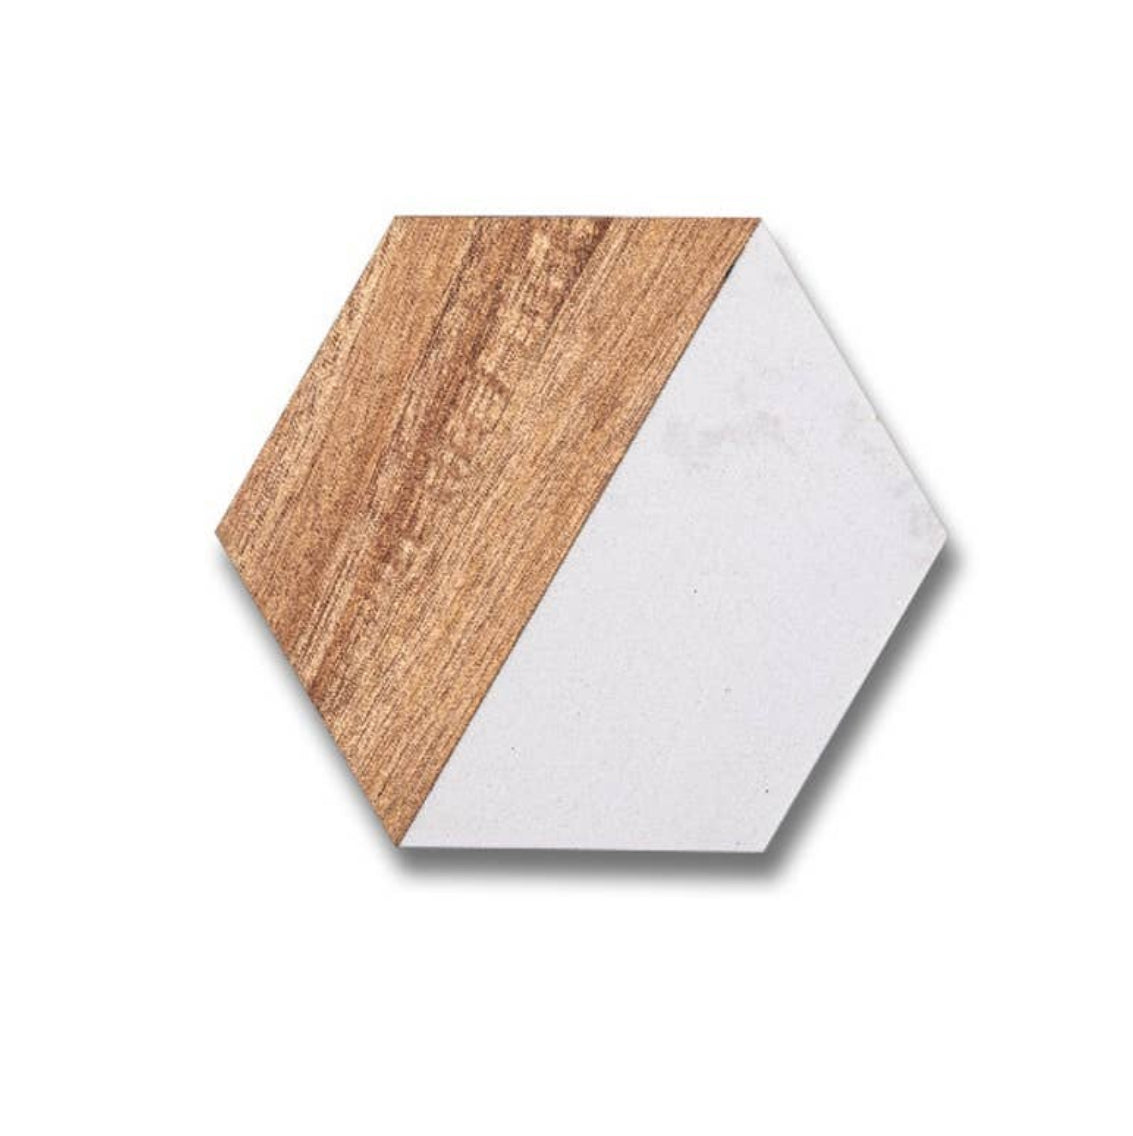 Marble and wood coasters